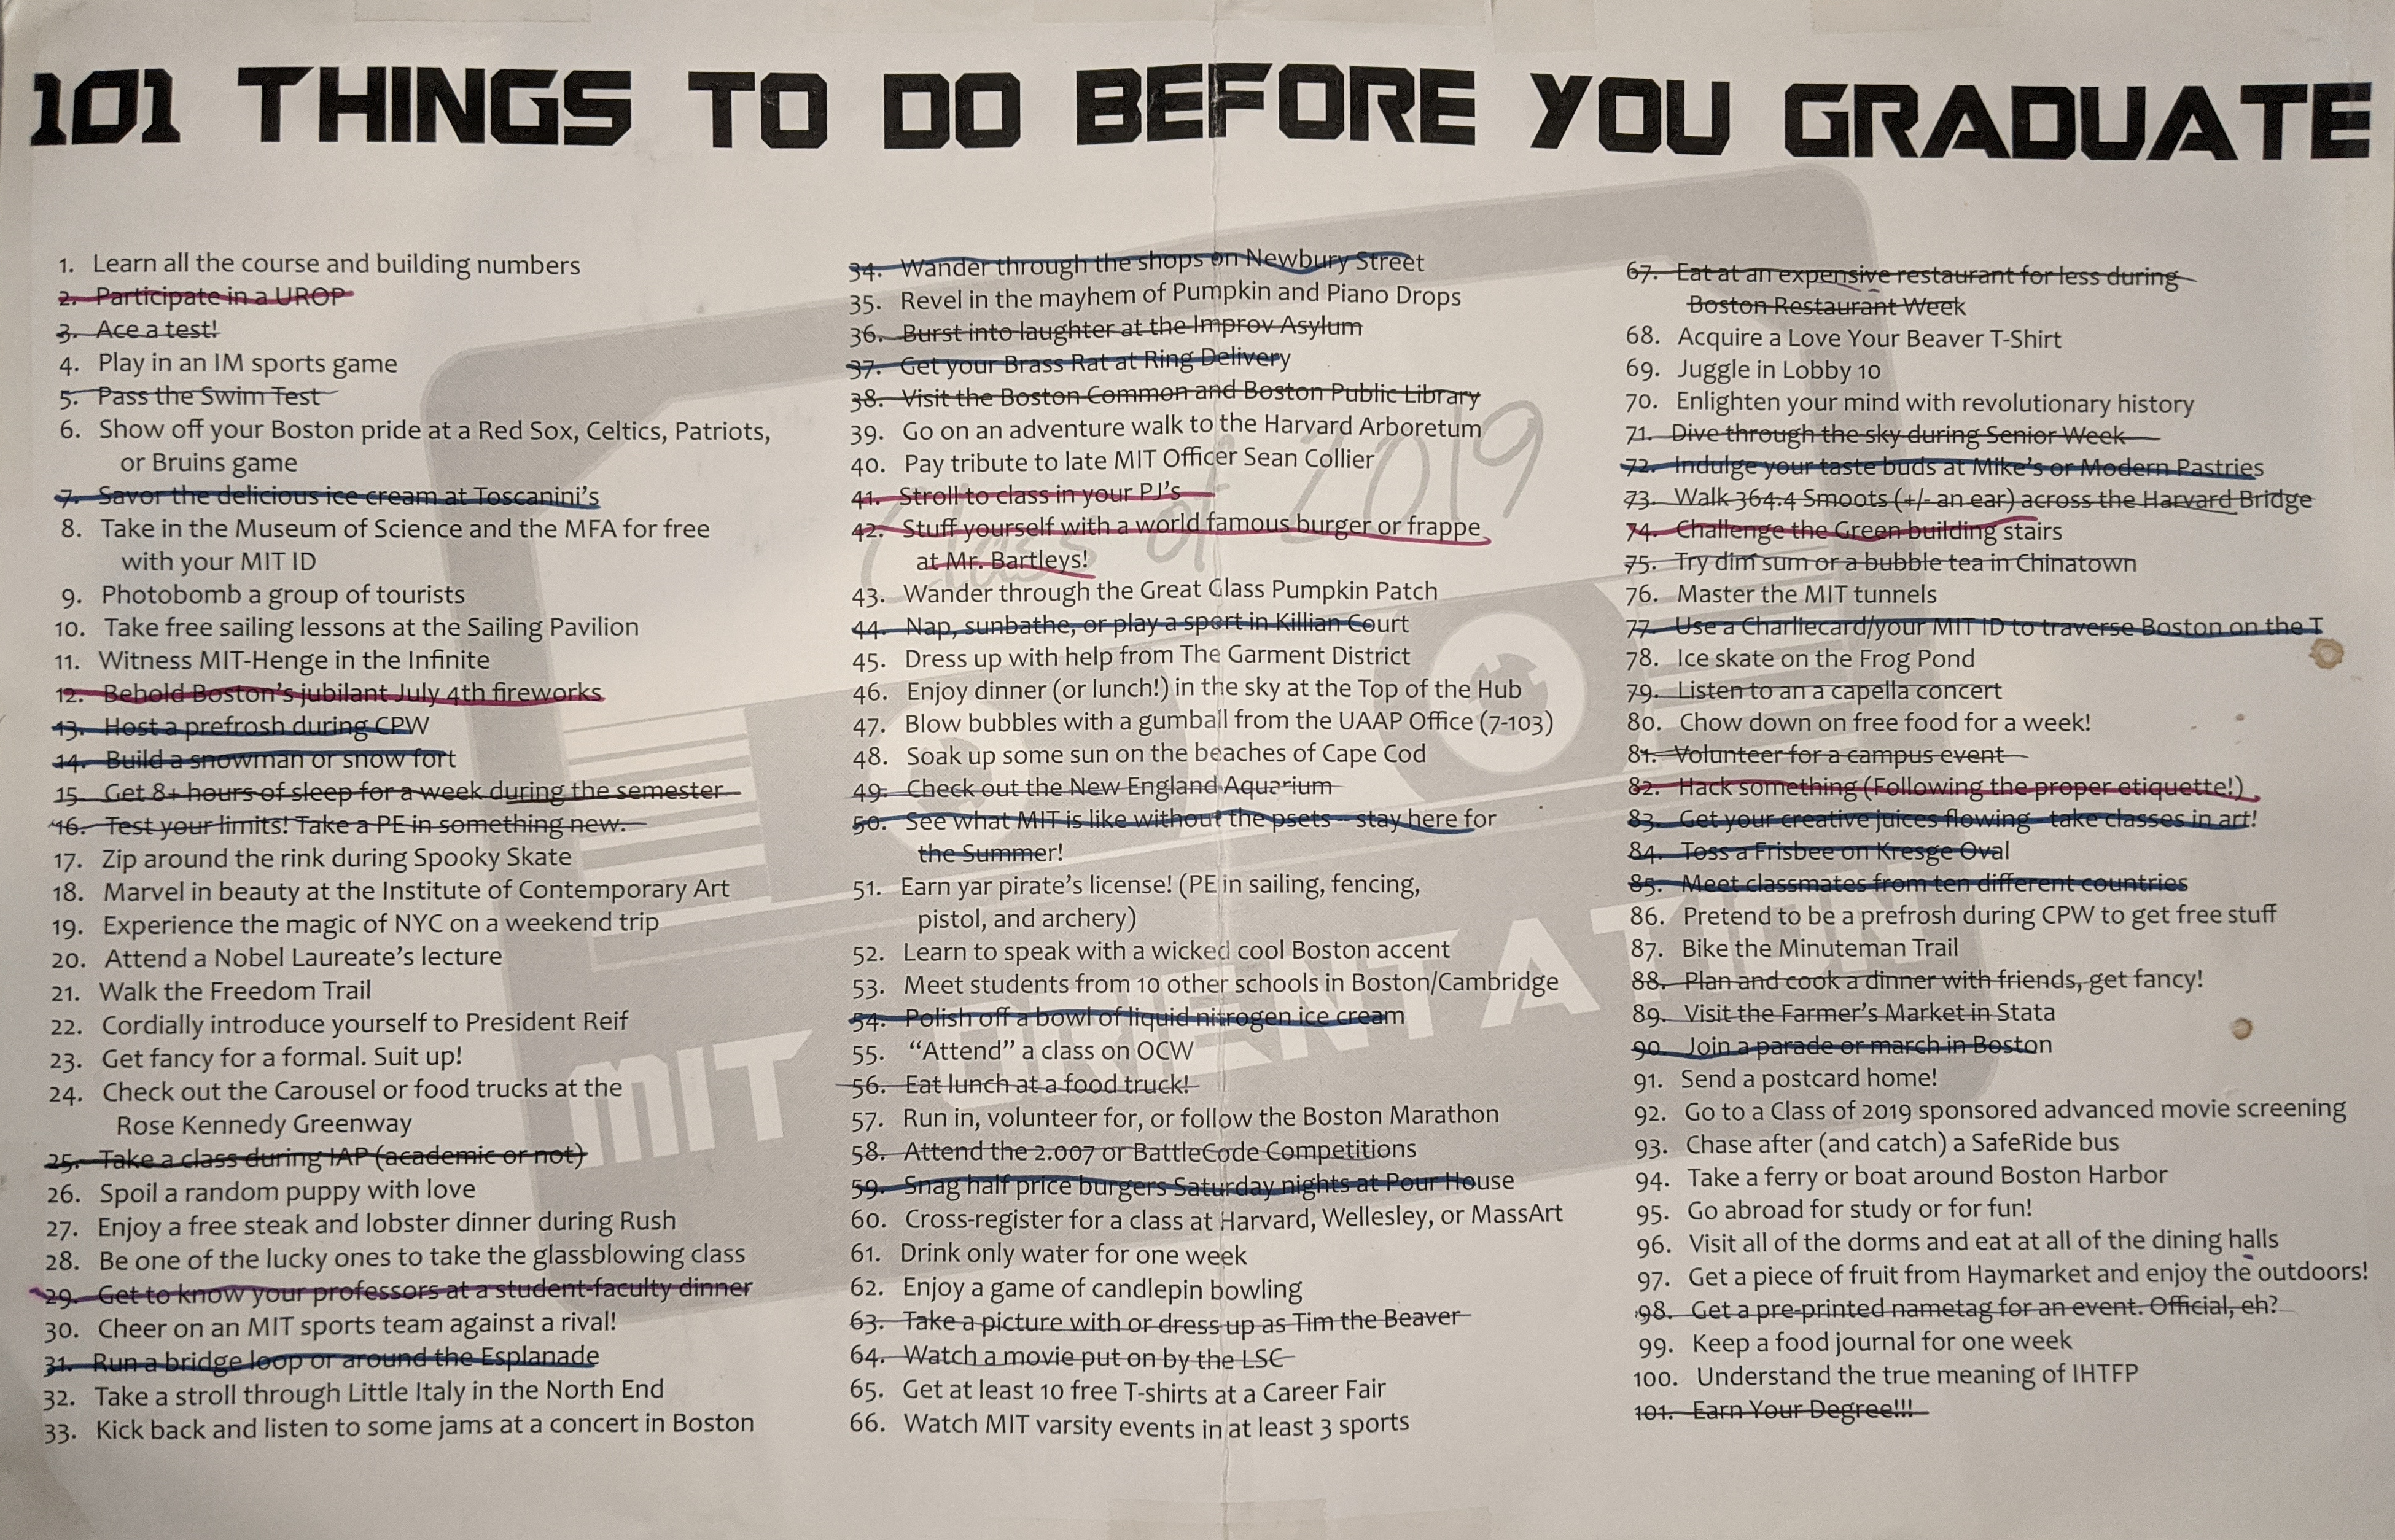 "101 Thiings To Do Before You Graduate" poster with 45 things crossed off